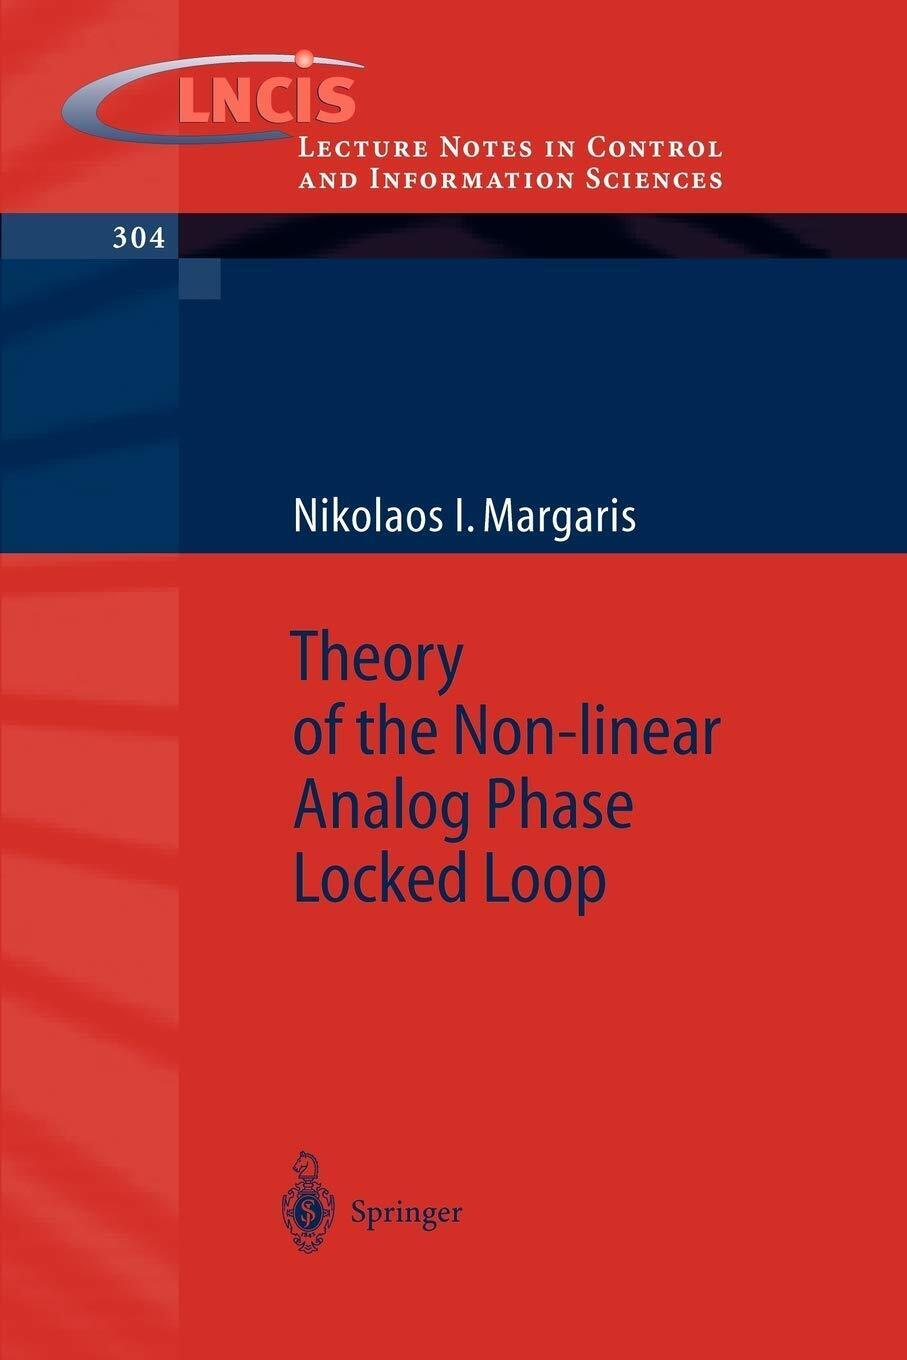 Theory of the Non-linear Analog Phase Locked Loop - Springer, 2008 libro usato